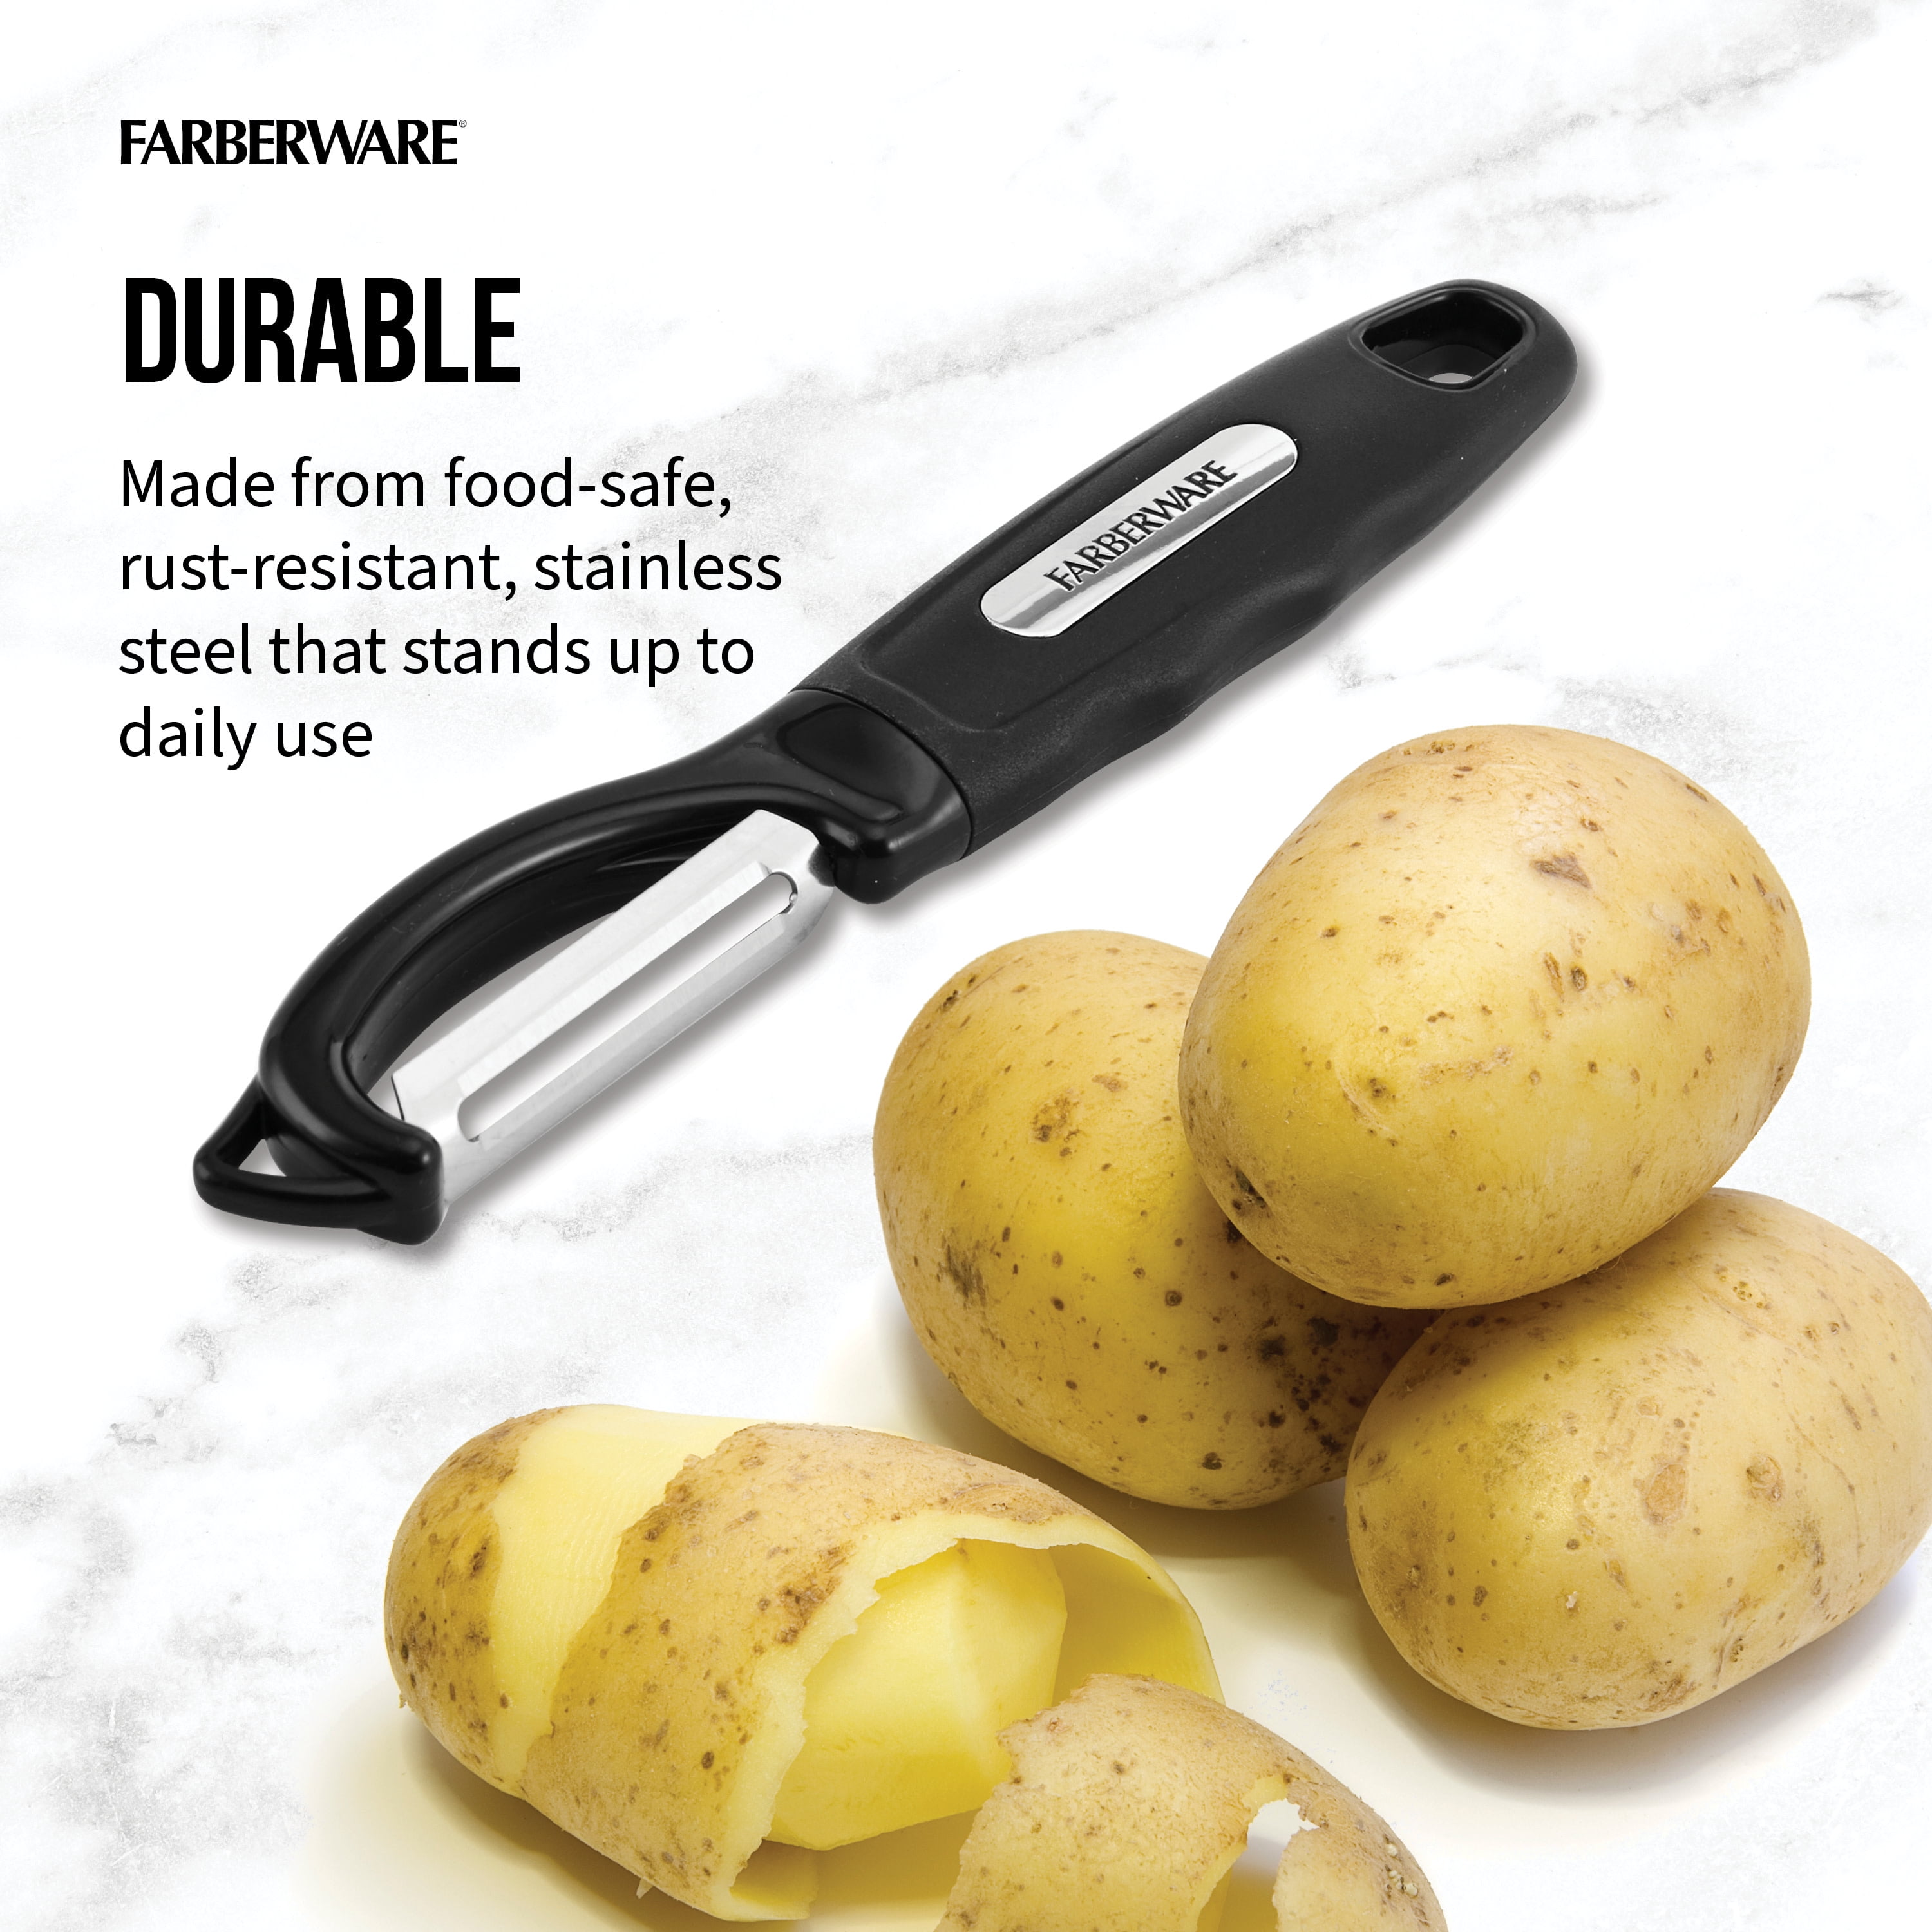  Farberware Professional Euro Vegetable Peeler with Built-in Eye  Remover, Black: Home & Kitchen